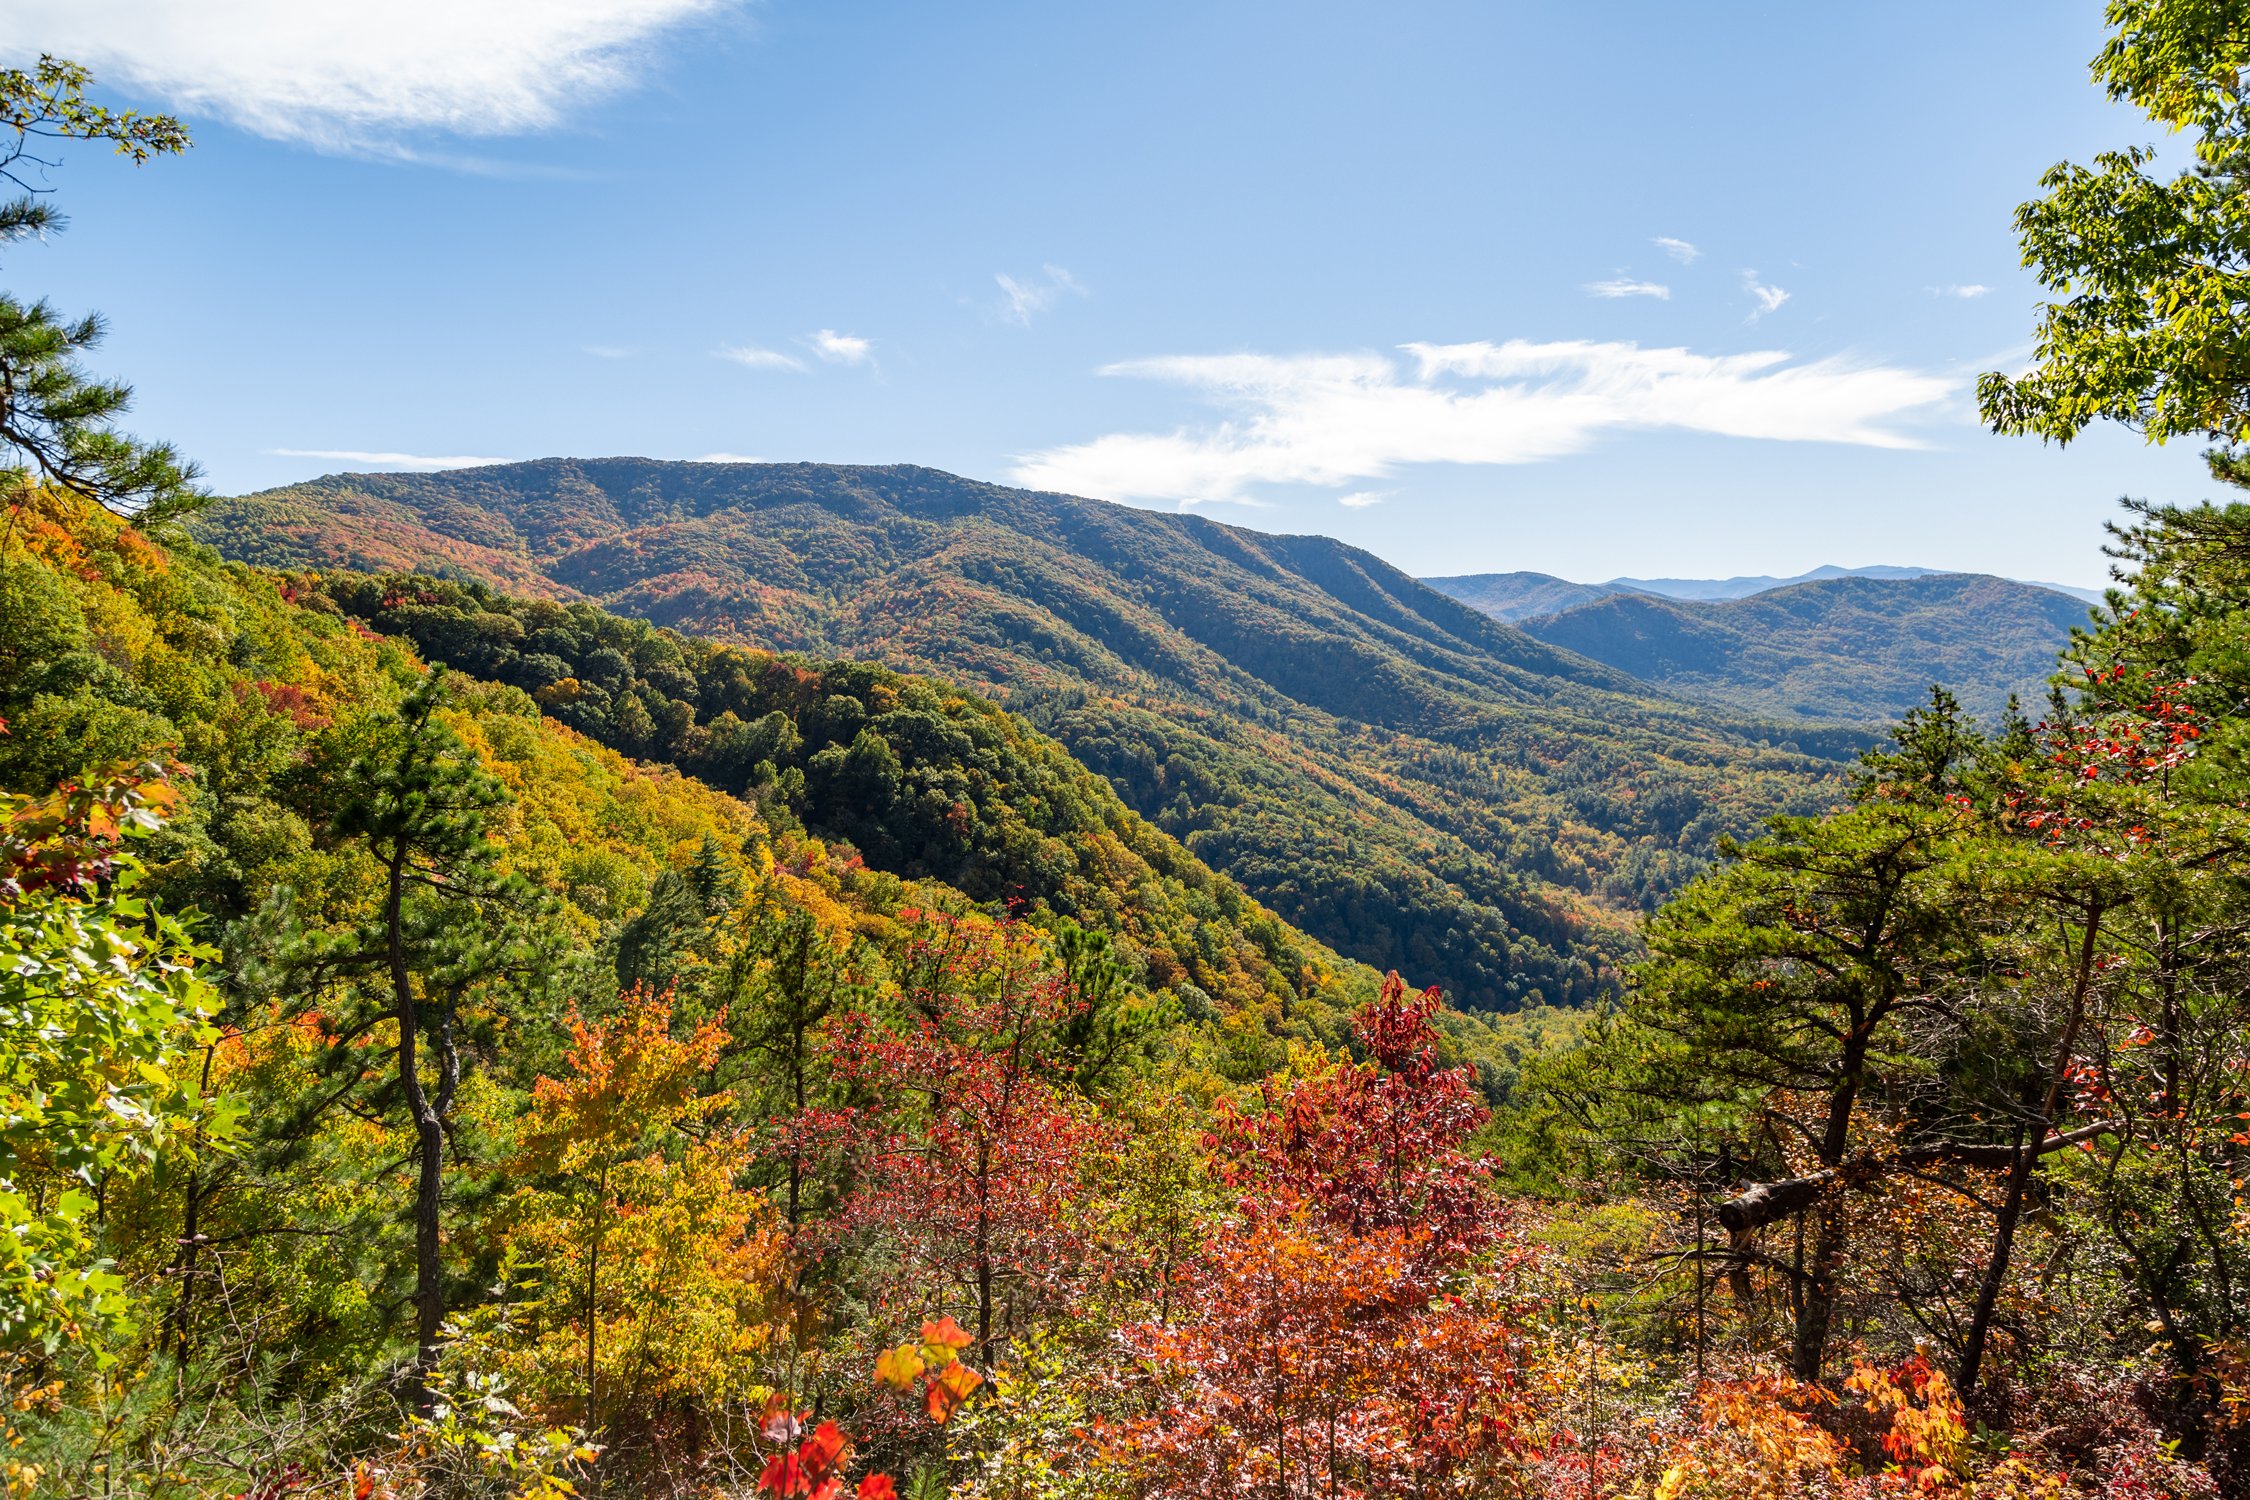 REI_Takes_Tennessee61_resize.jpg